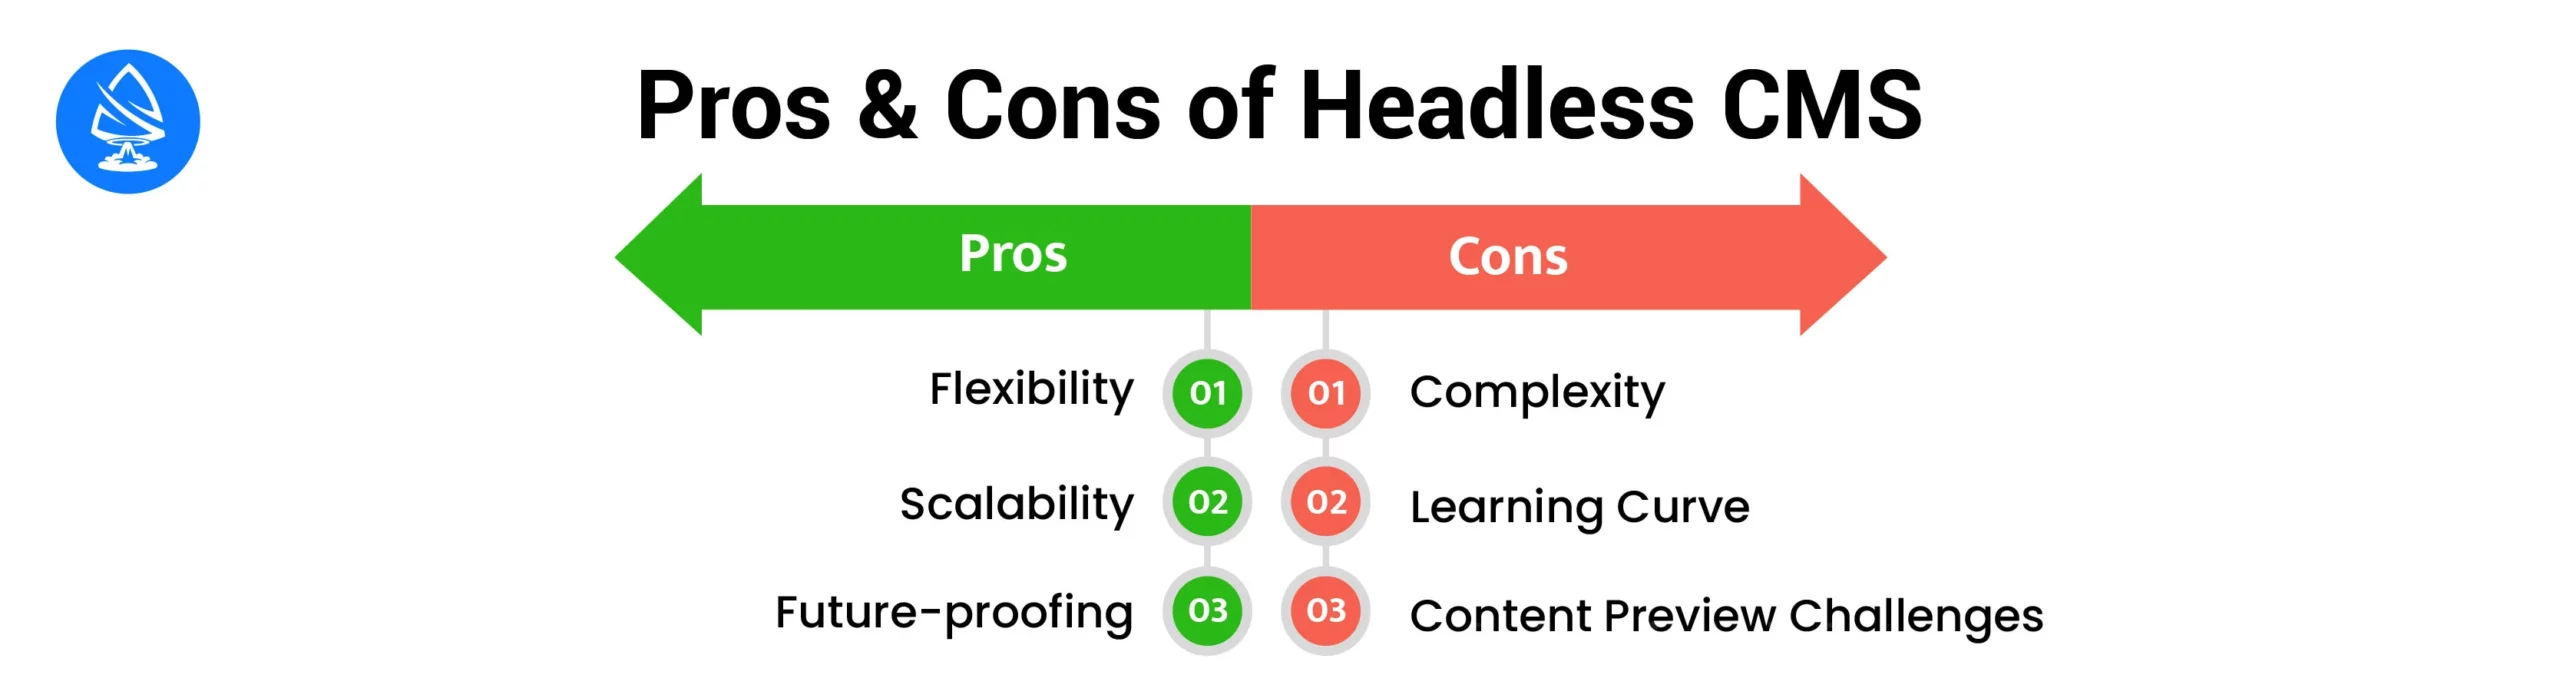 Pros and cons of headless CMS